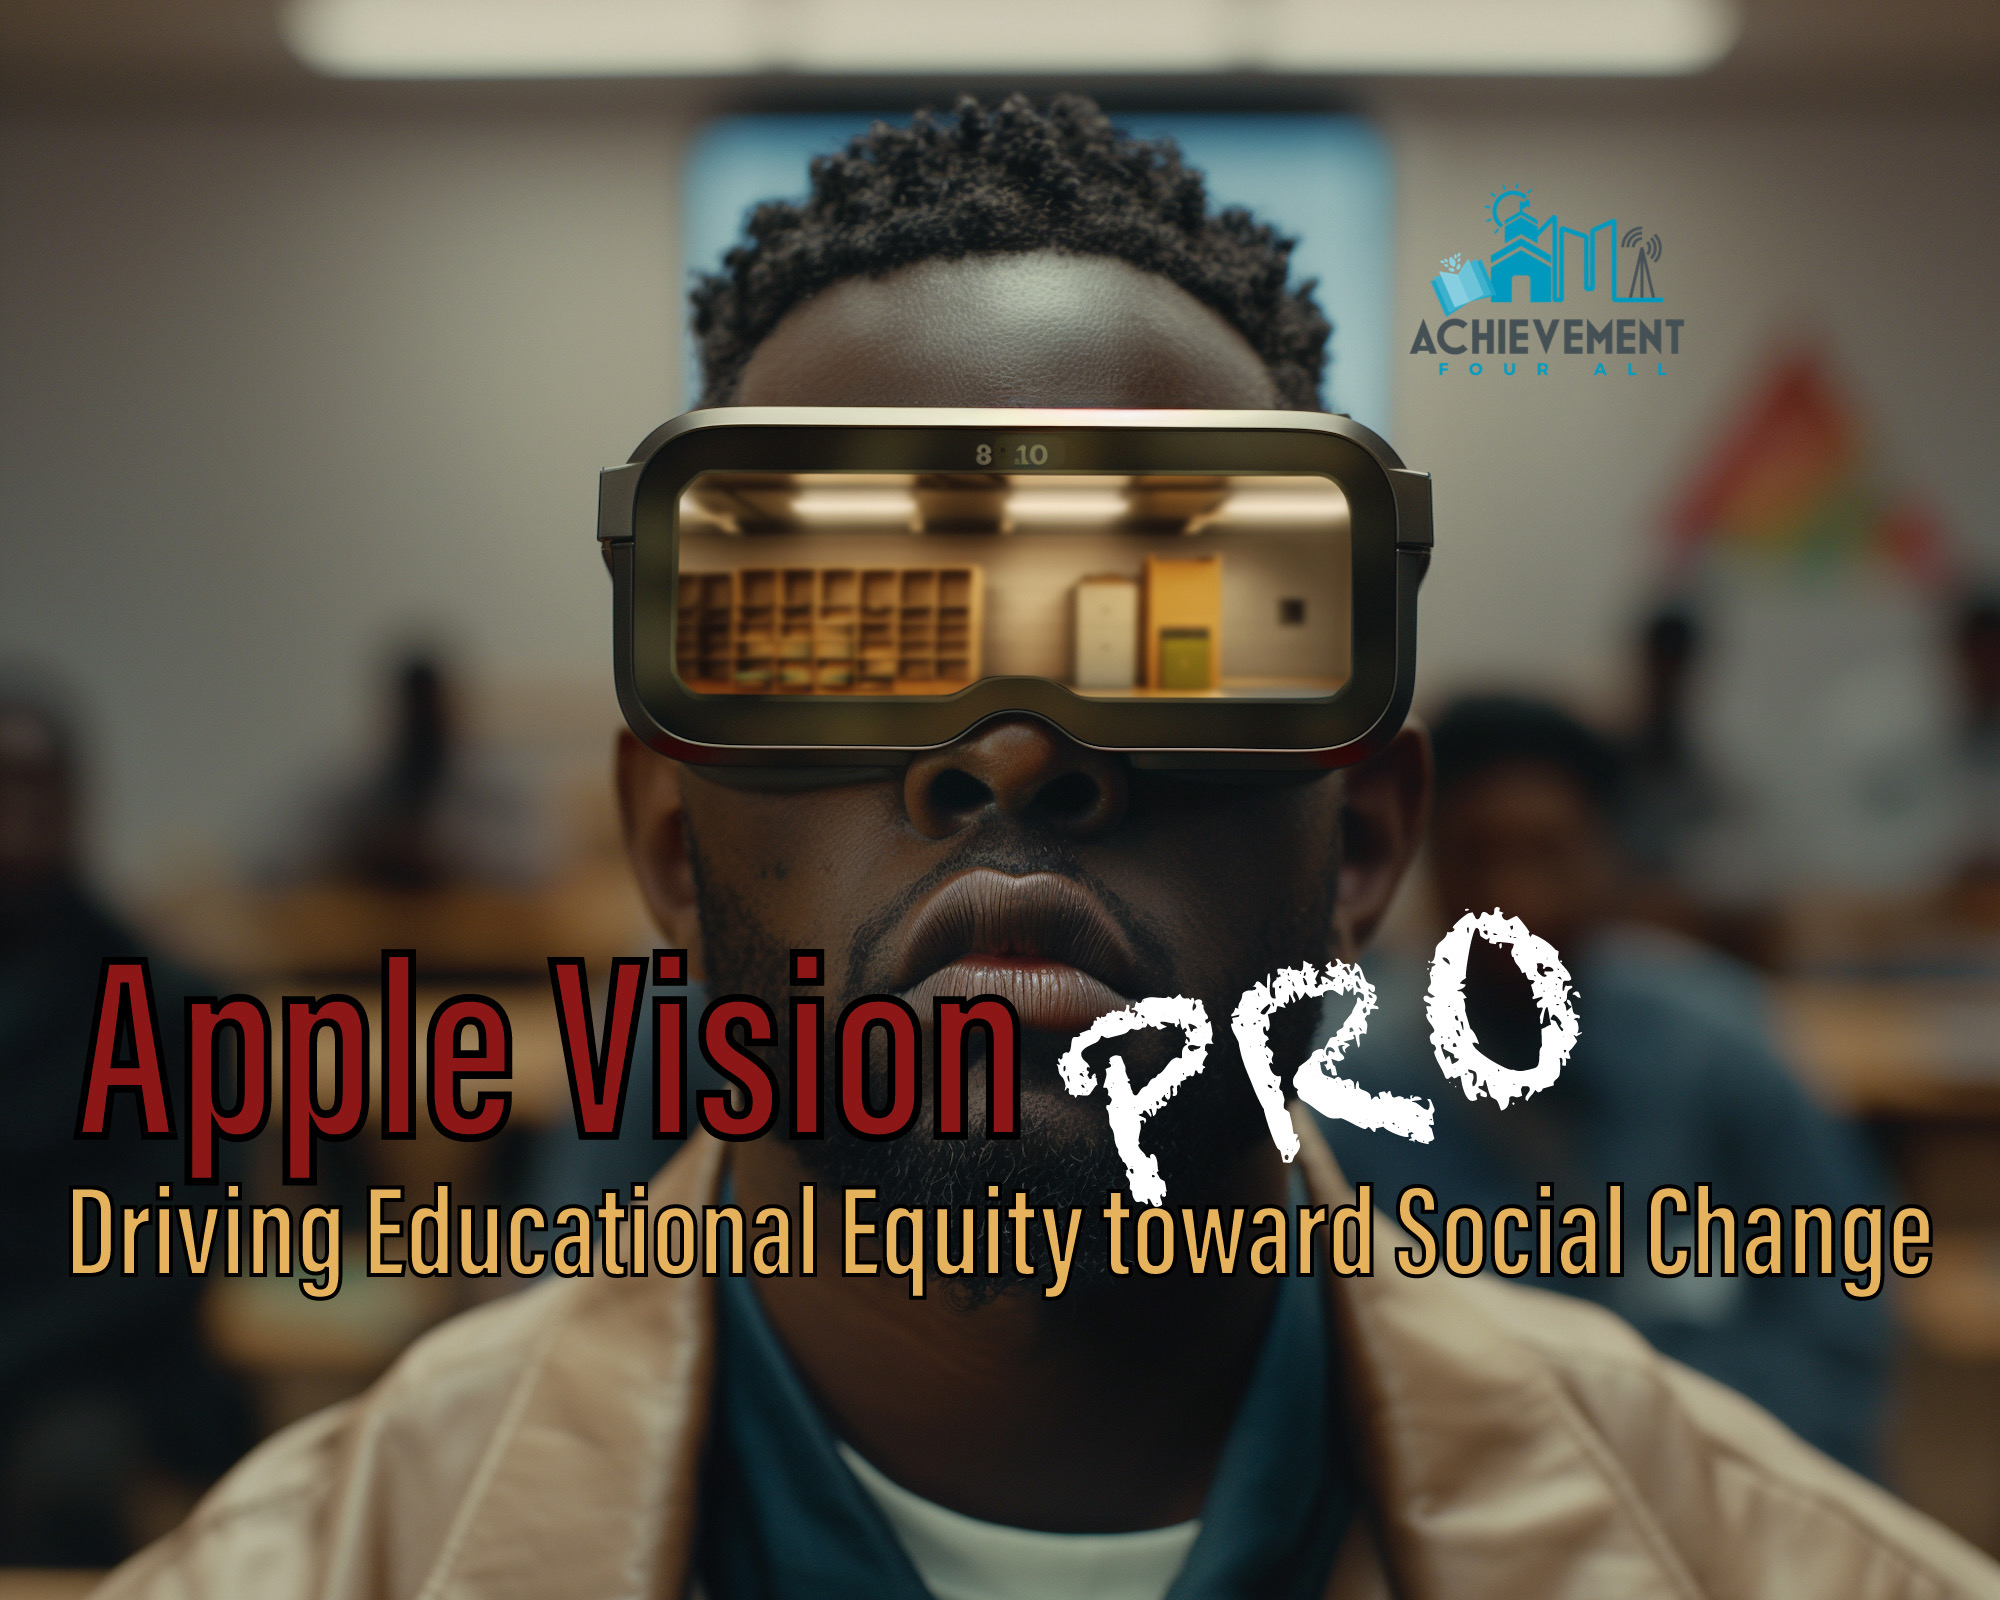 “Apple Vision Pro: Driving Educational Equity toward Social Change”